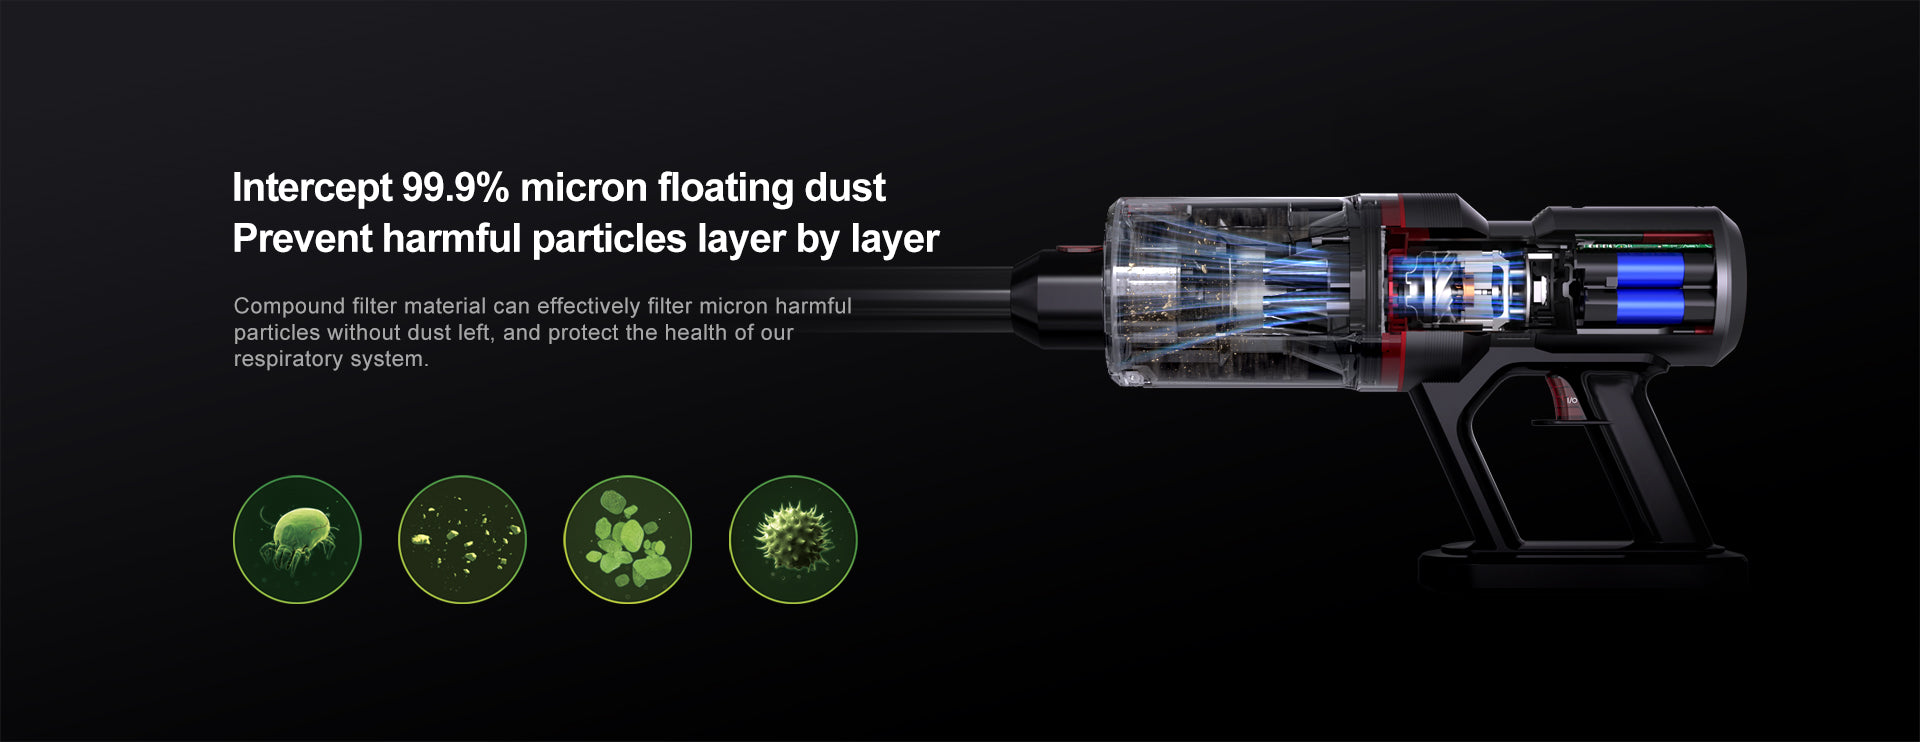 Intercept_99.9_micron_floating_dust_Prevent_harmful_particles_layer_by_layer